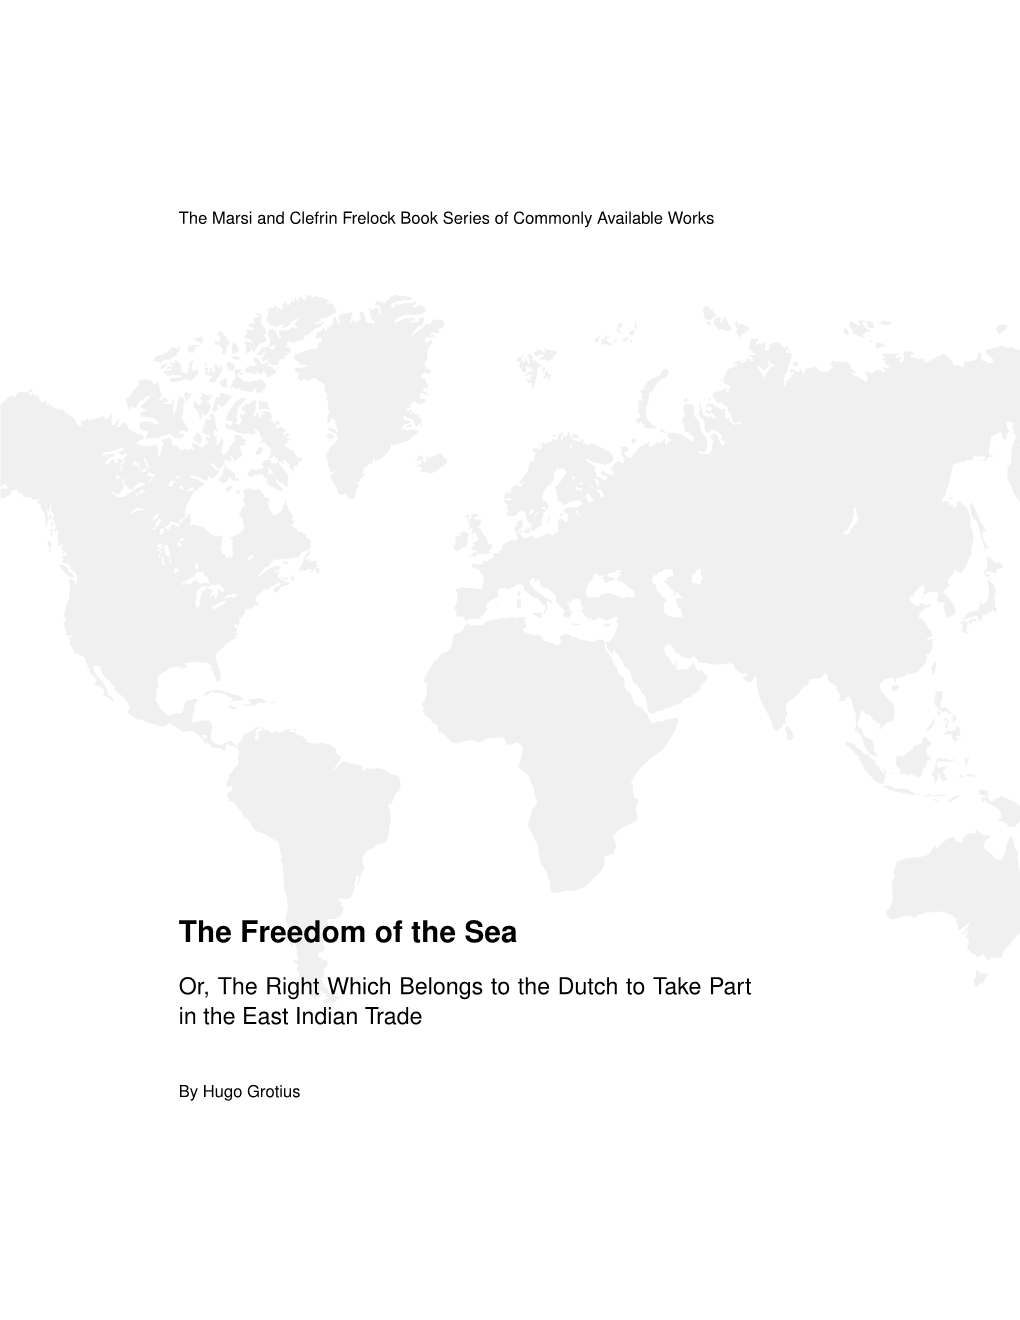 The Freedom of the Sea